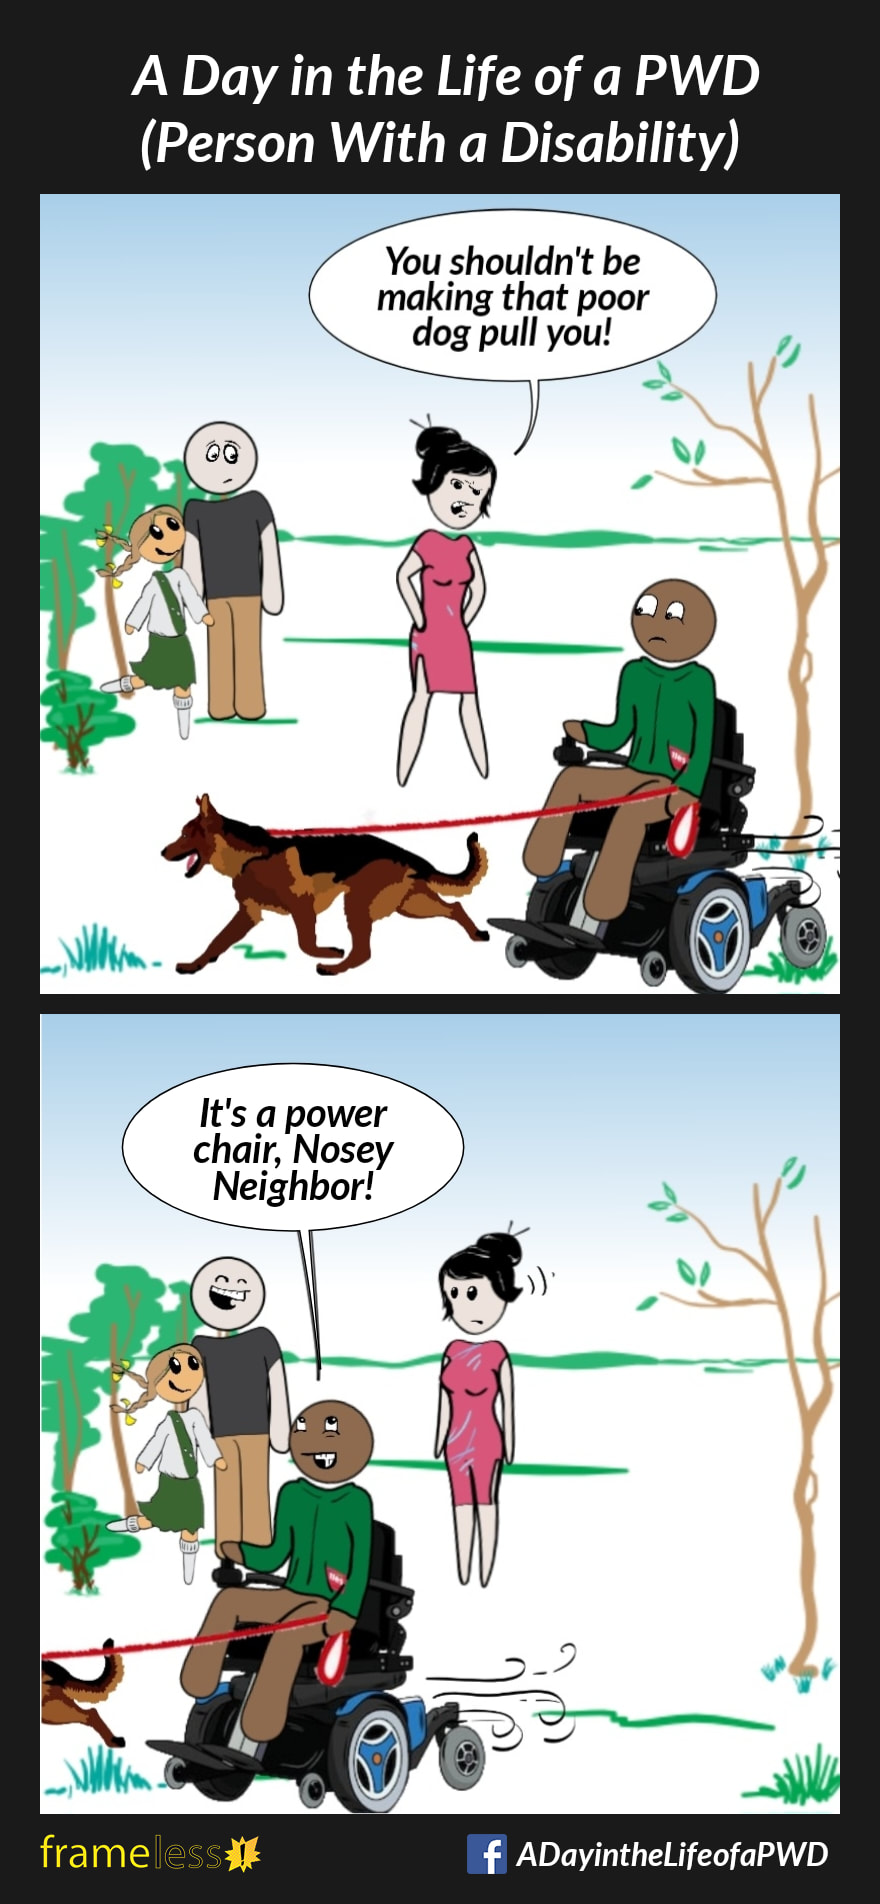 COMIC STRIP 
A Day in the Life of a PWD (Person With a Disability) 

Frame 1:
A man in a power wheelchair is walking his dog through a park. A woman sees him and becomes angry.
WOMAN: You shouldn't be making that poor dog pull you!

Frame 2:
MAN: It's a power chair, Nosey Neighbor!